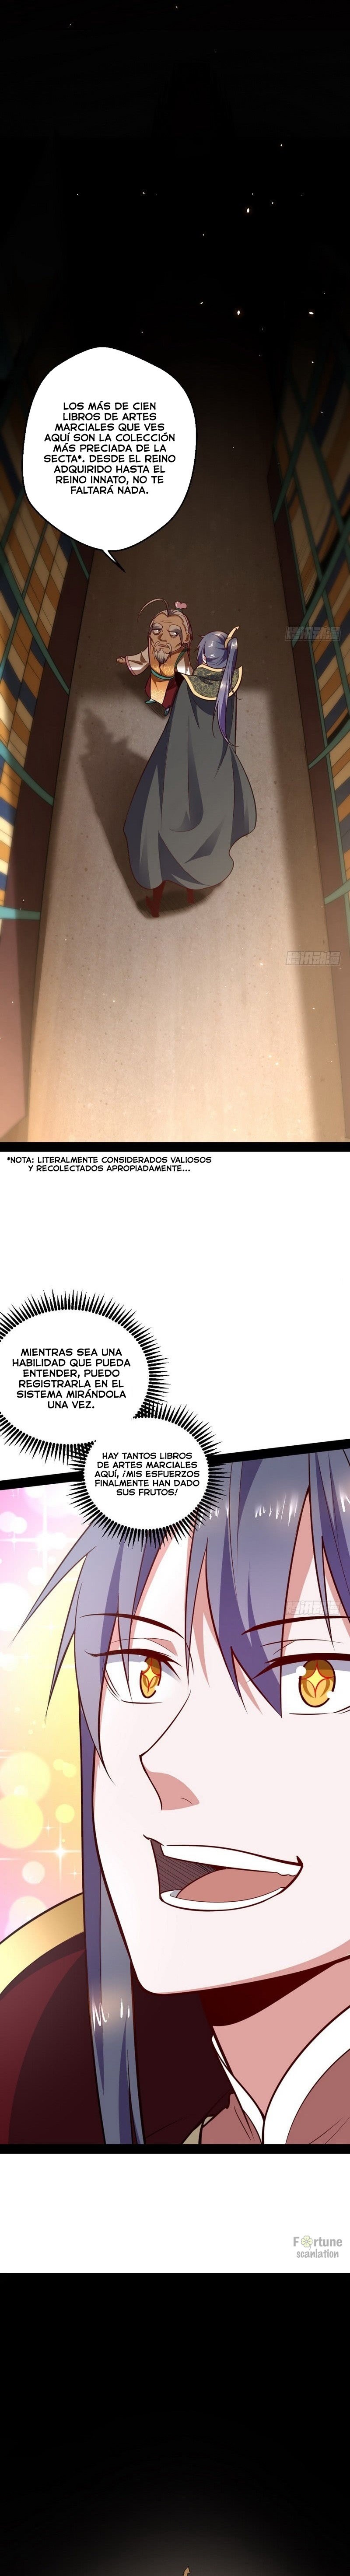 Manga Soy un dios maligno Chapter 24 image number 8